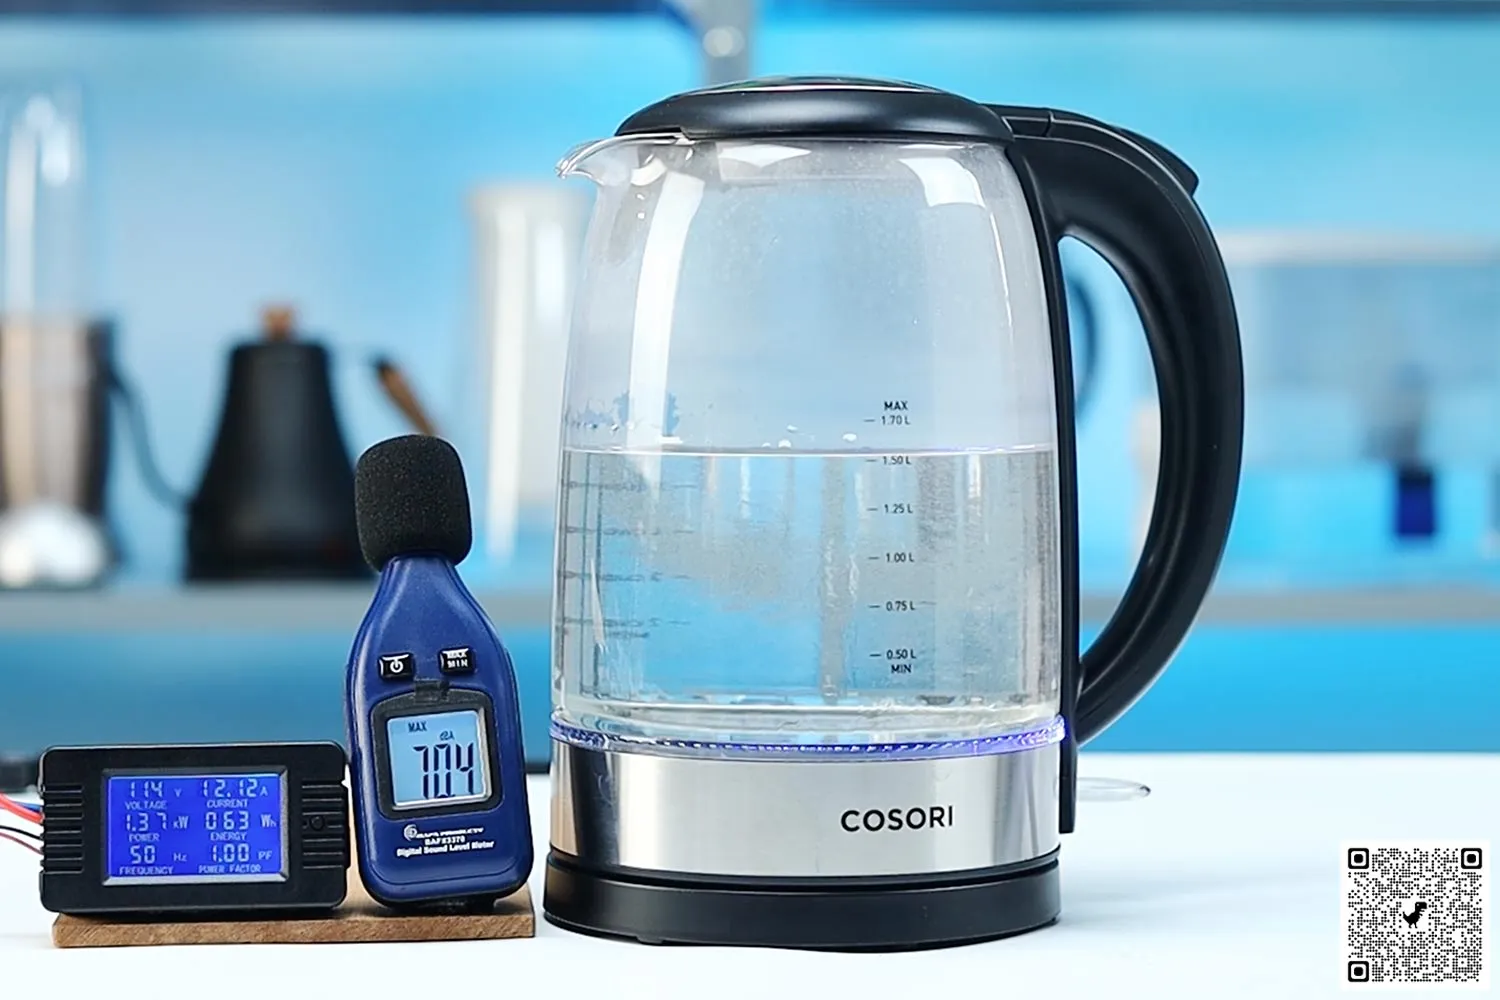 https://cdn.healthykitchen101.com/reviews/images/kettles/cosori-glass-electric-kettle-gk172-co-noise-level-clleo6dw30003zb88c2v81gon.jpg